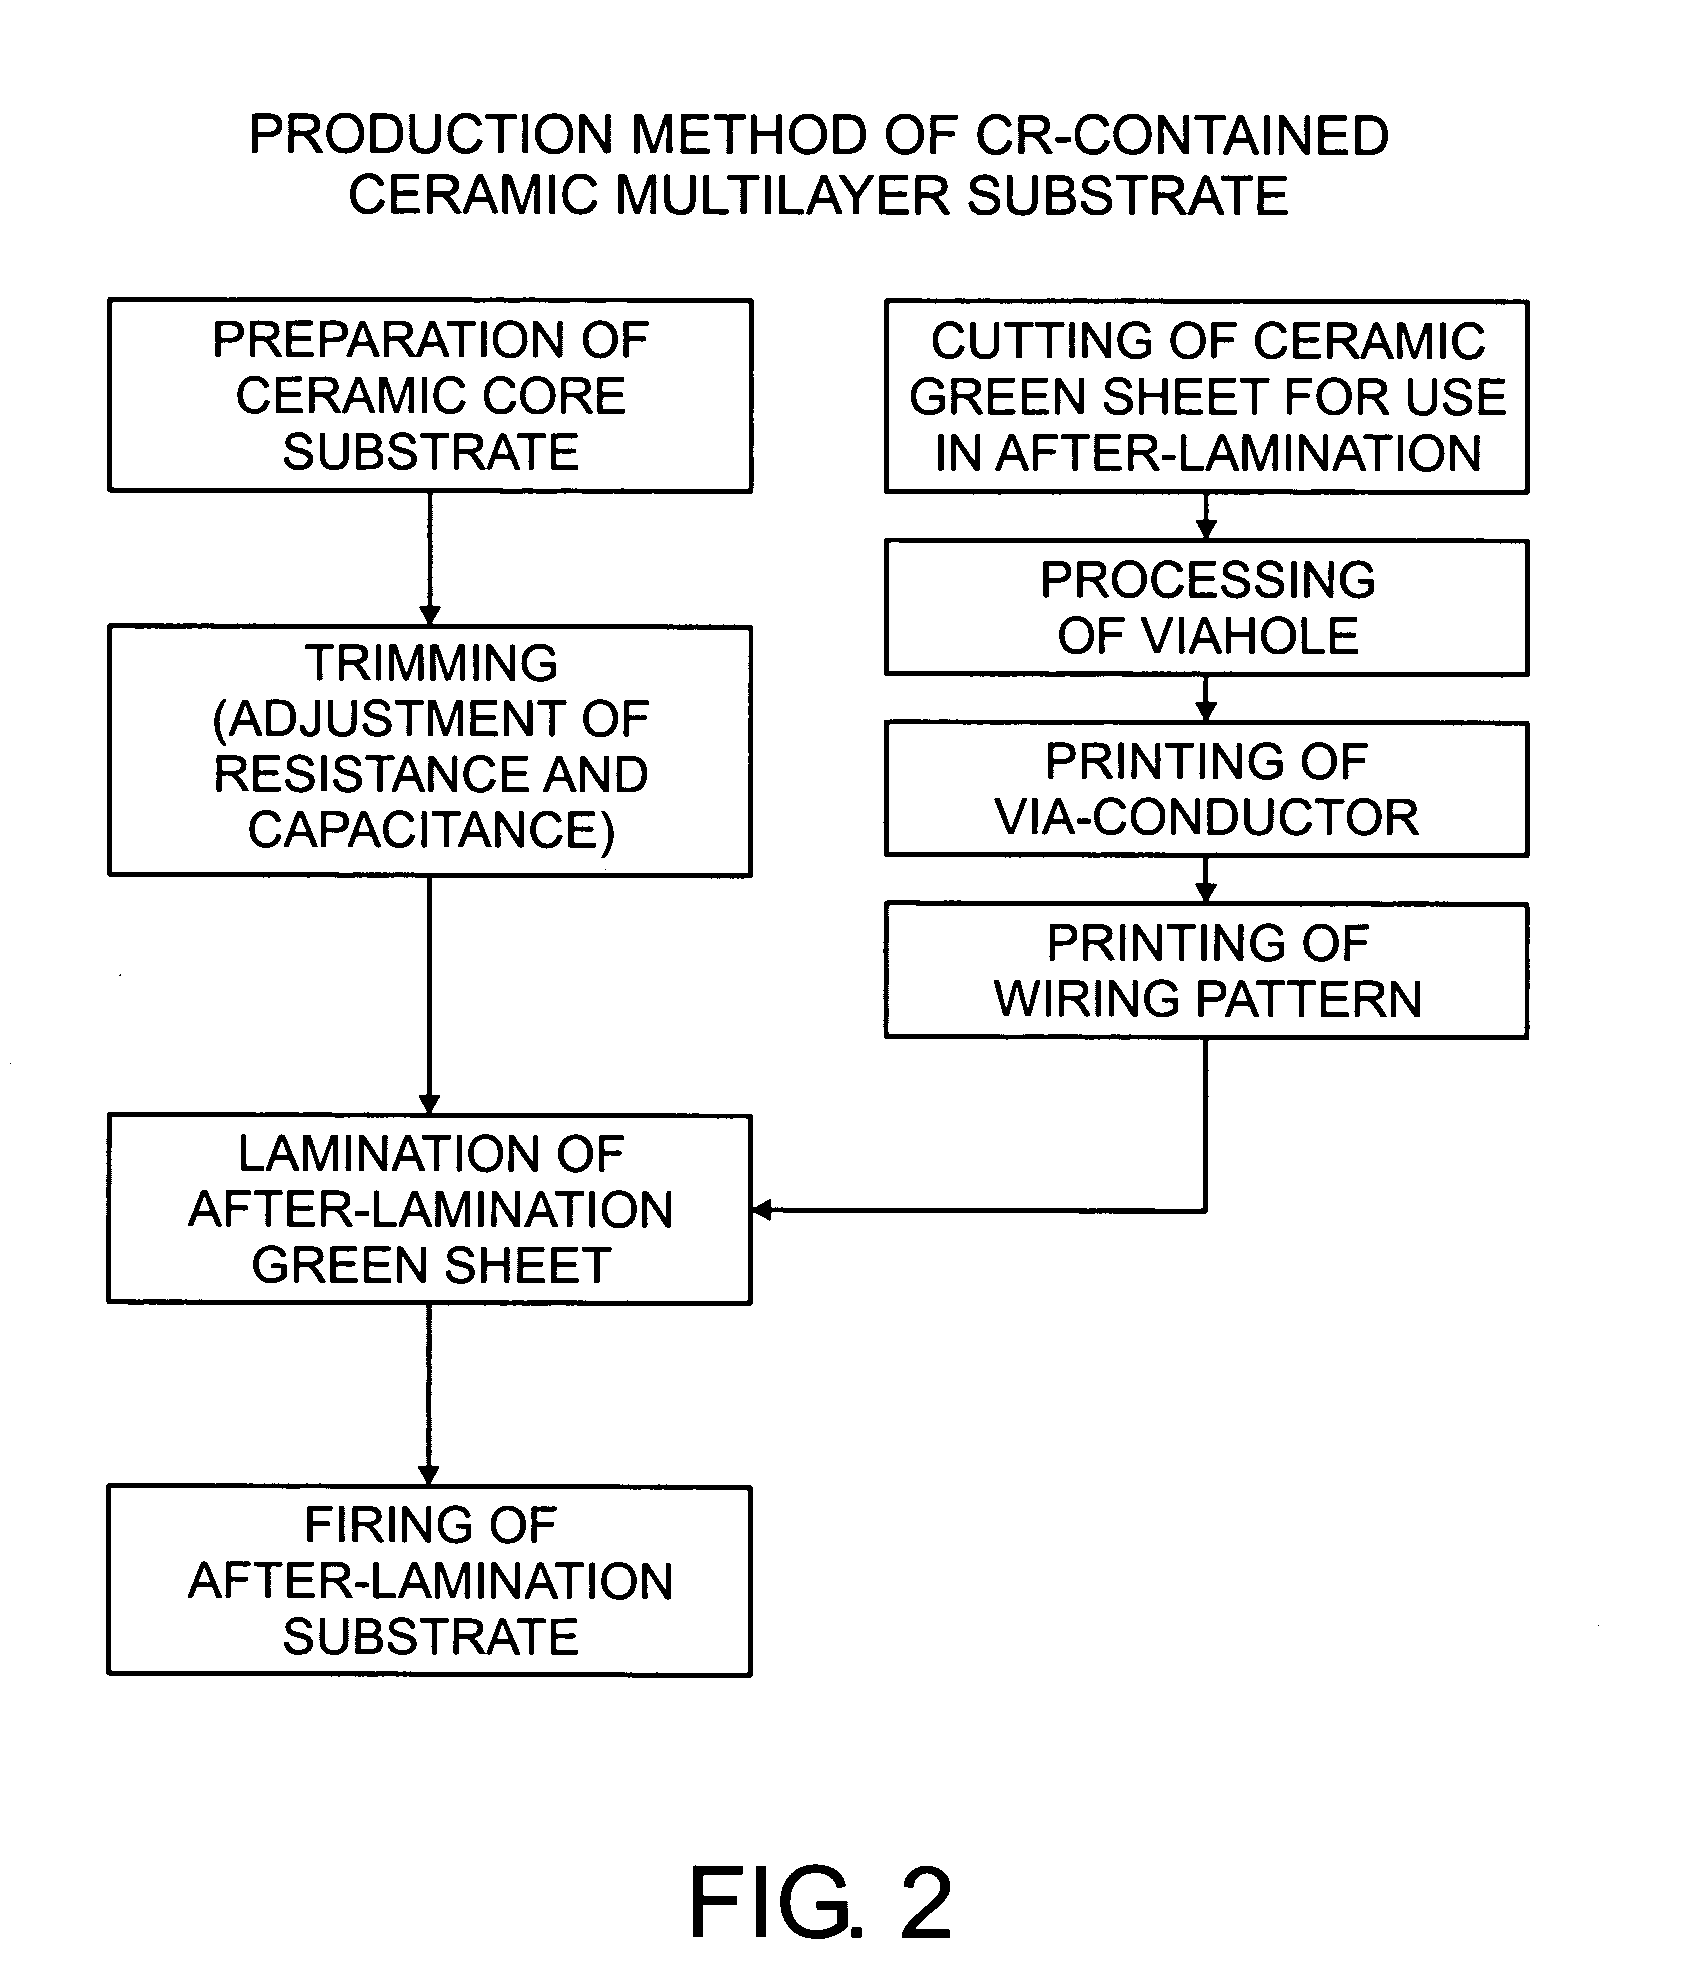 Method of producing ceramic multilayer substrate